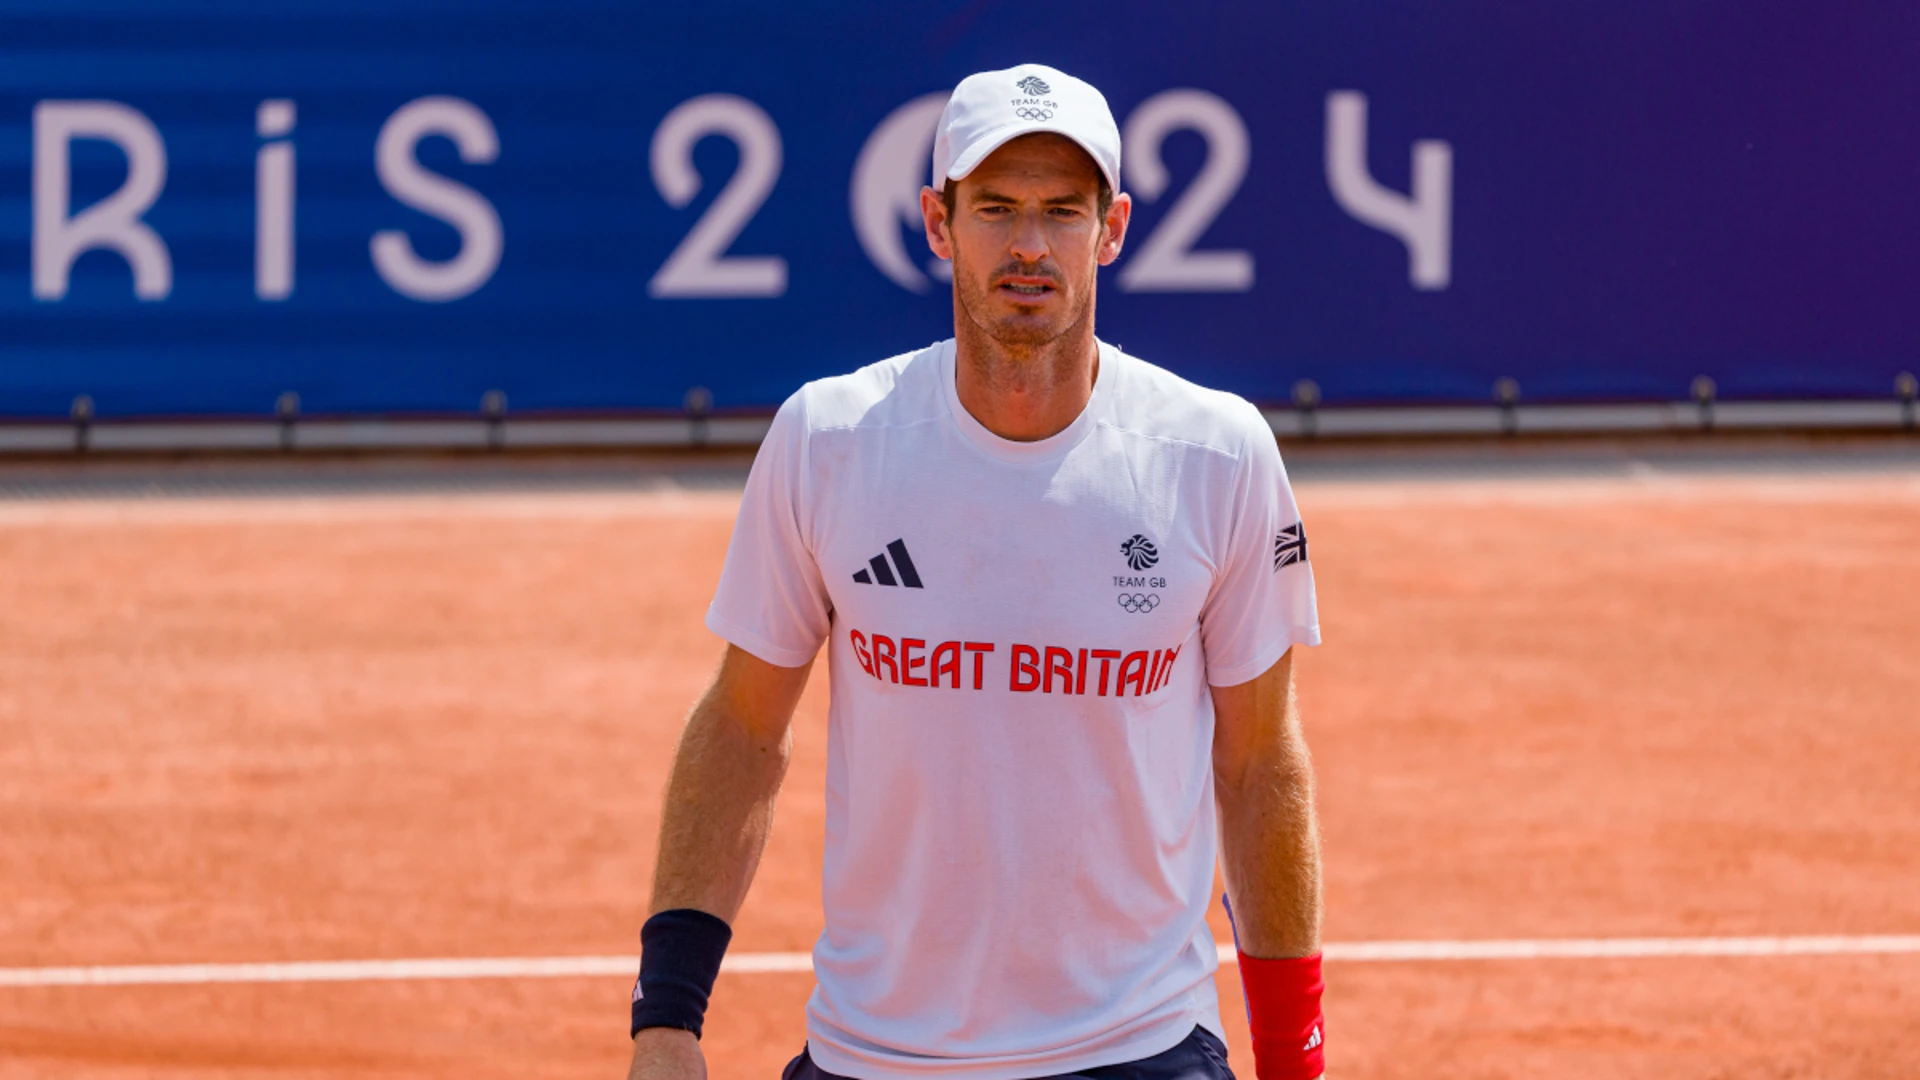 Murray likely to play only doubles in Paris Games farewell